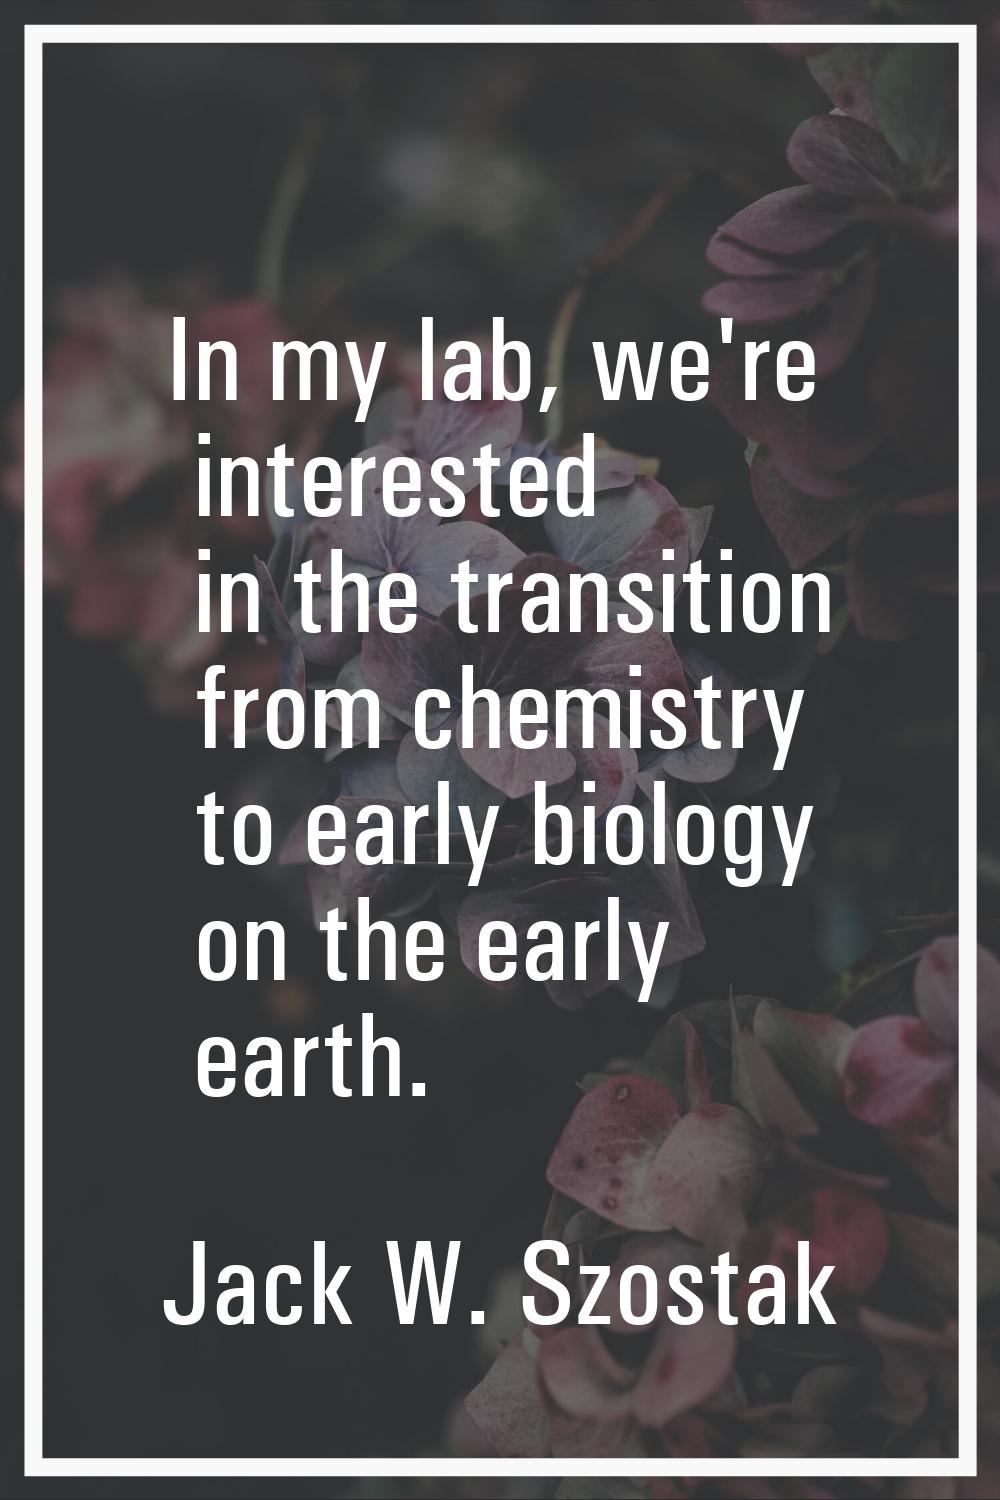 In my lab, we're interested in the transition from chemistry to early biology on the early earth.